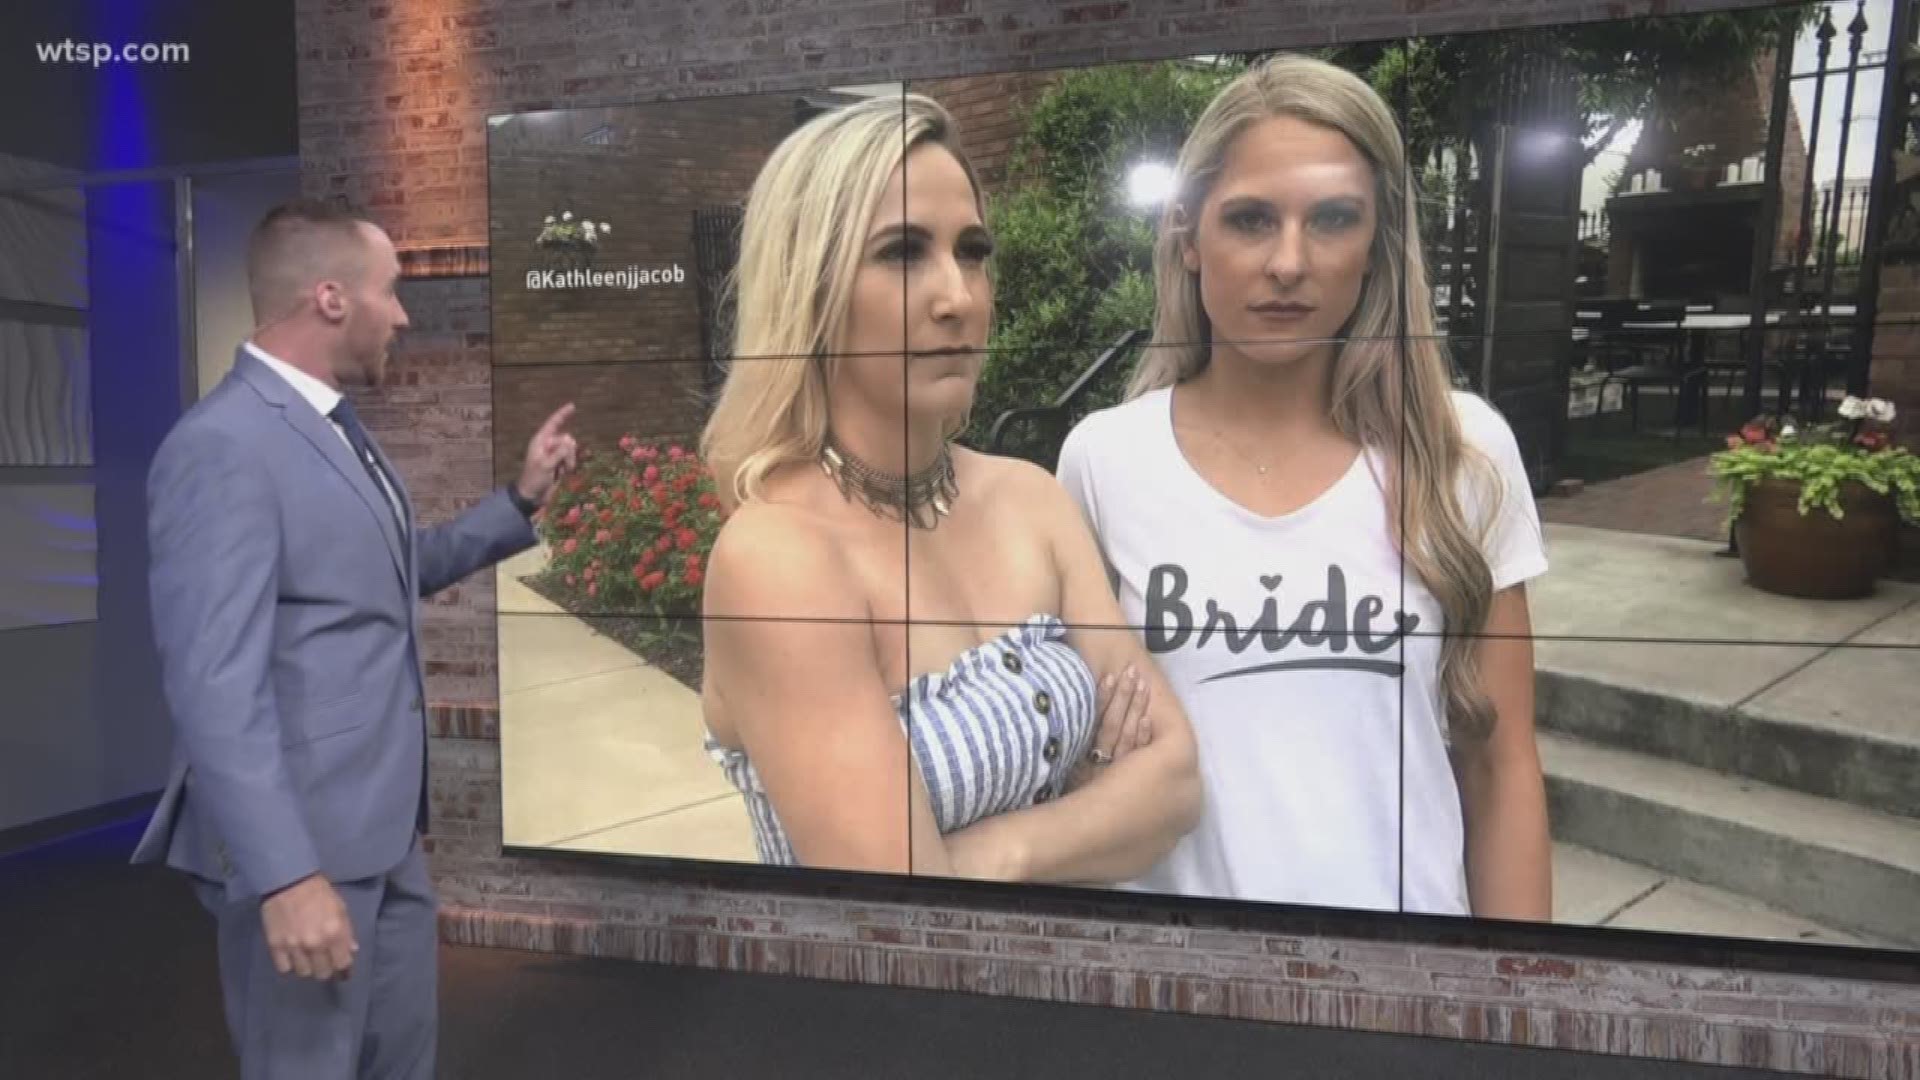 Ladies celebrating him putting a ring on it in Nashville weren't too happy Music City hosted the NFL draft of their weekend. Bachelorettes who hoped to have a 'Nash Bash' were upset they had to share the city.